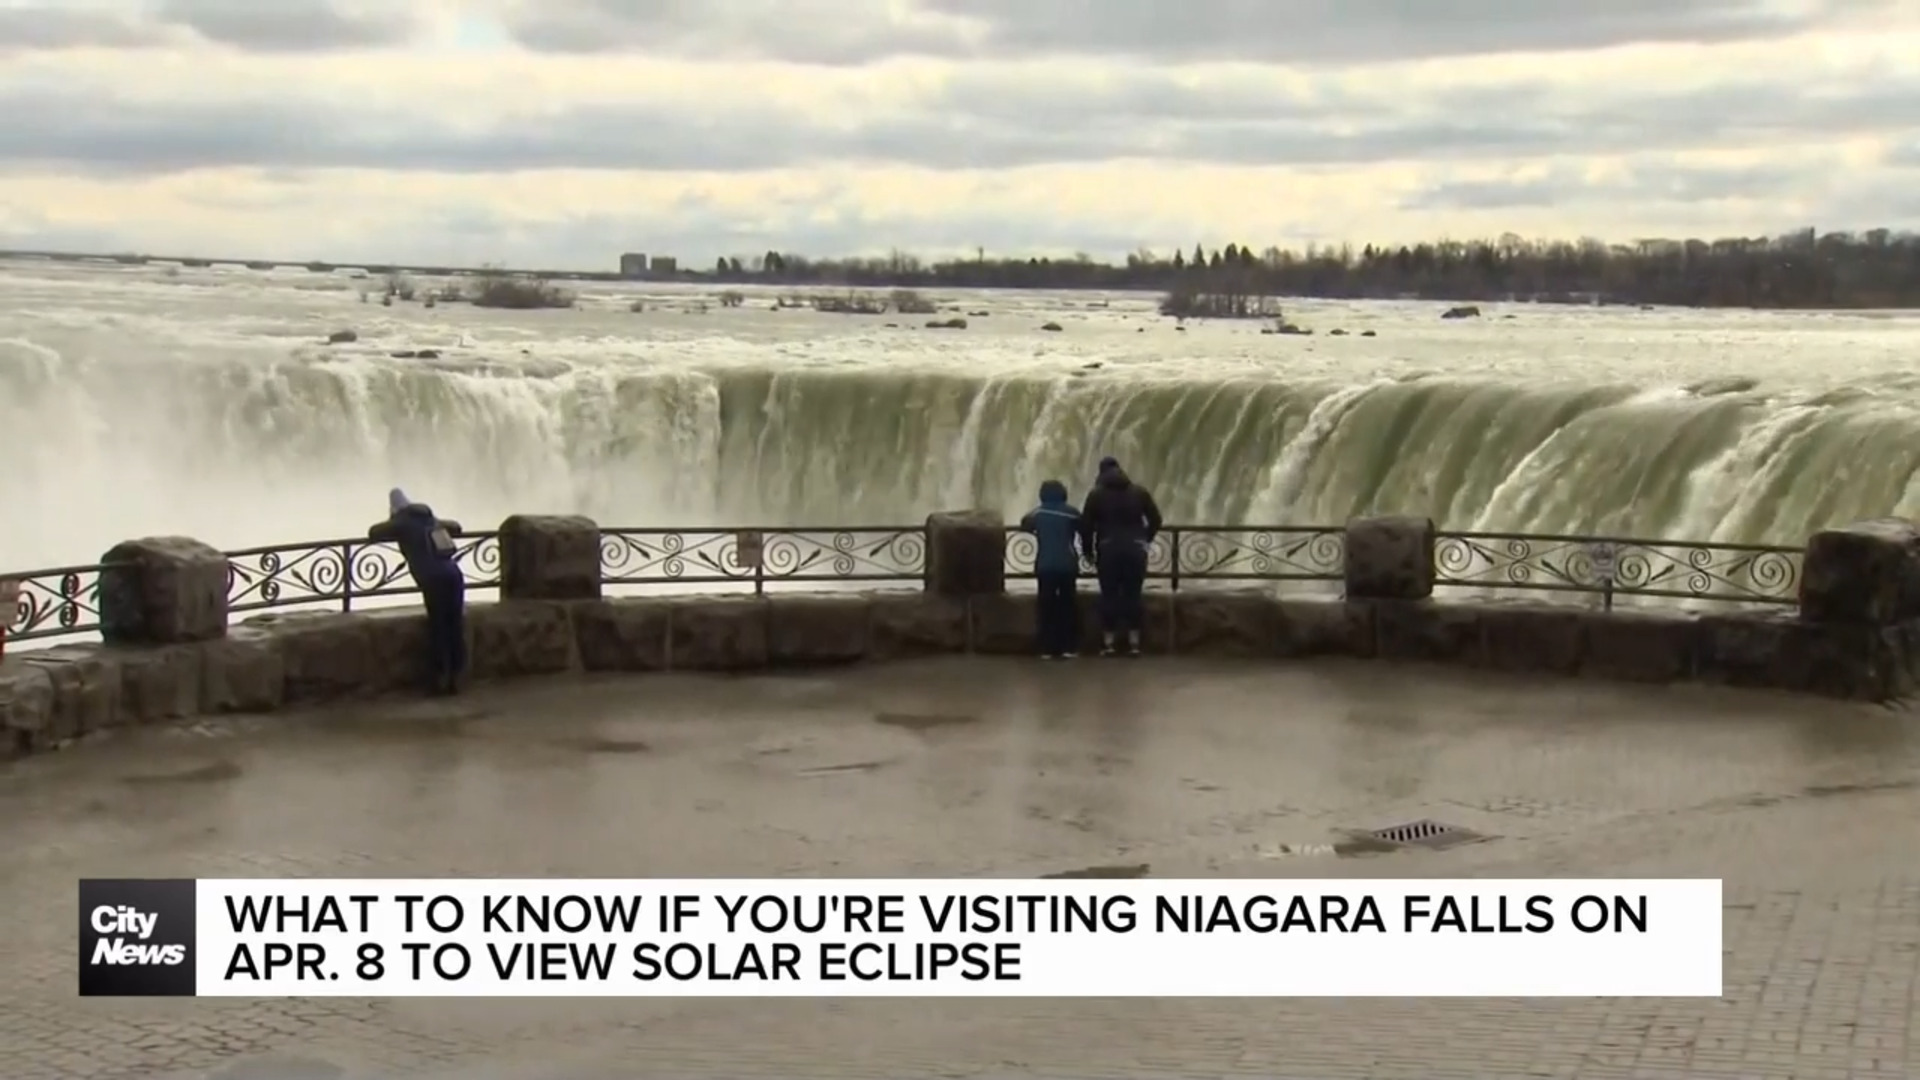 Are you planning to visit Niagara Falls for the solar eclipse? Here's what you need to know